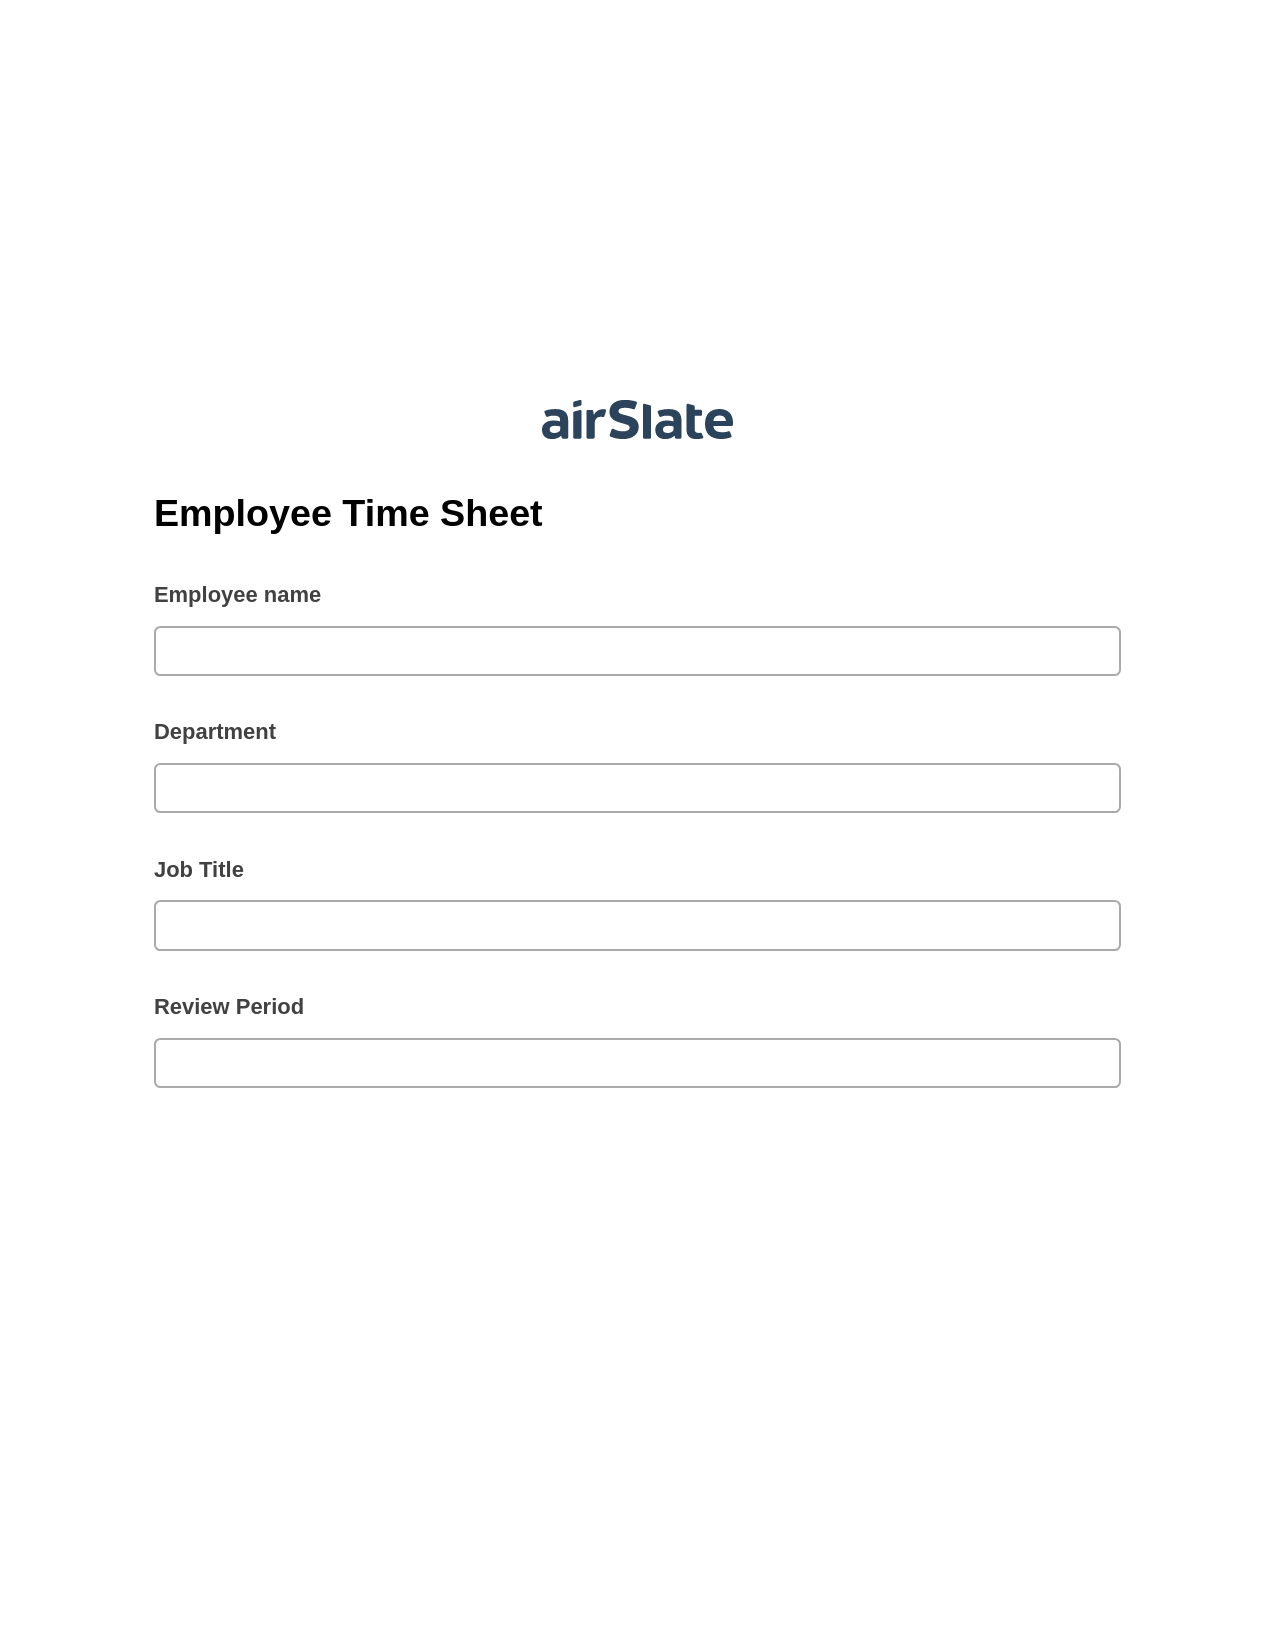 Multirole Employee Time Sheet Pre-fill from Excel Spreadsheet Bot, Create Salesforce Records Bot, Archive to SharePoint Folder Bot